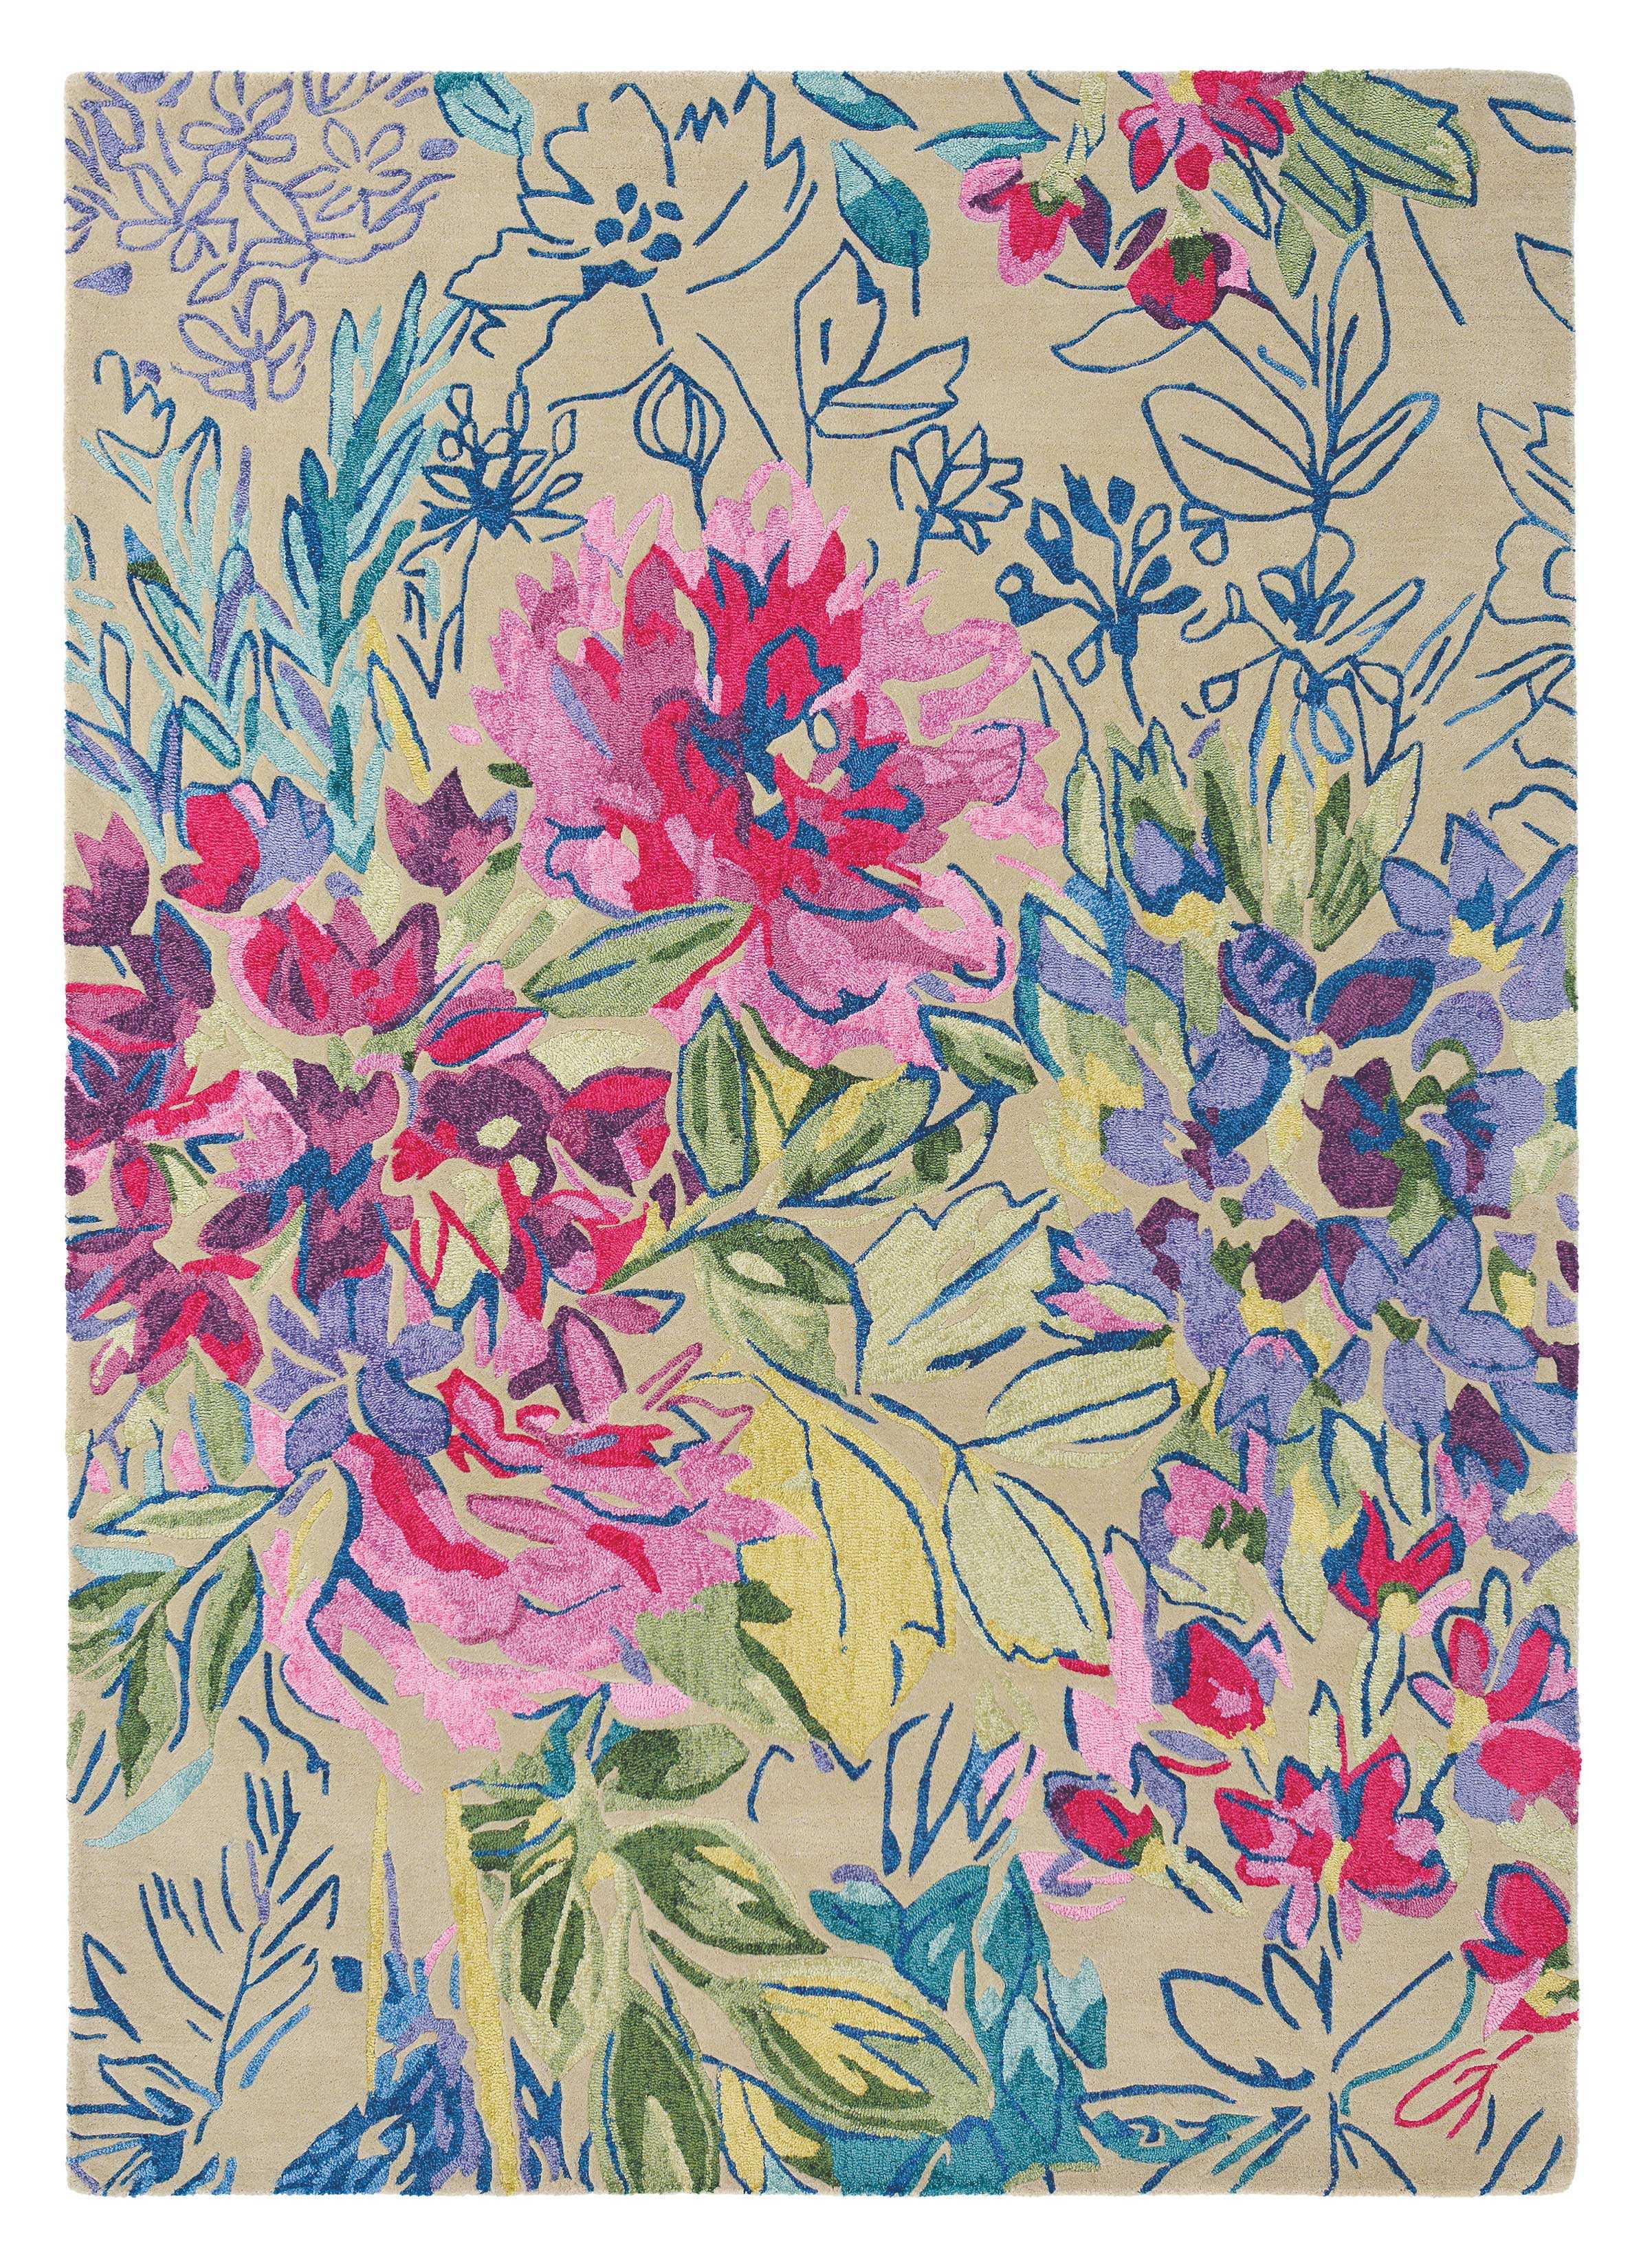 Rectangular beige wool rug with abstract floral design in pink, green and blue